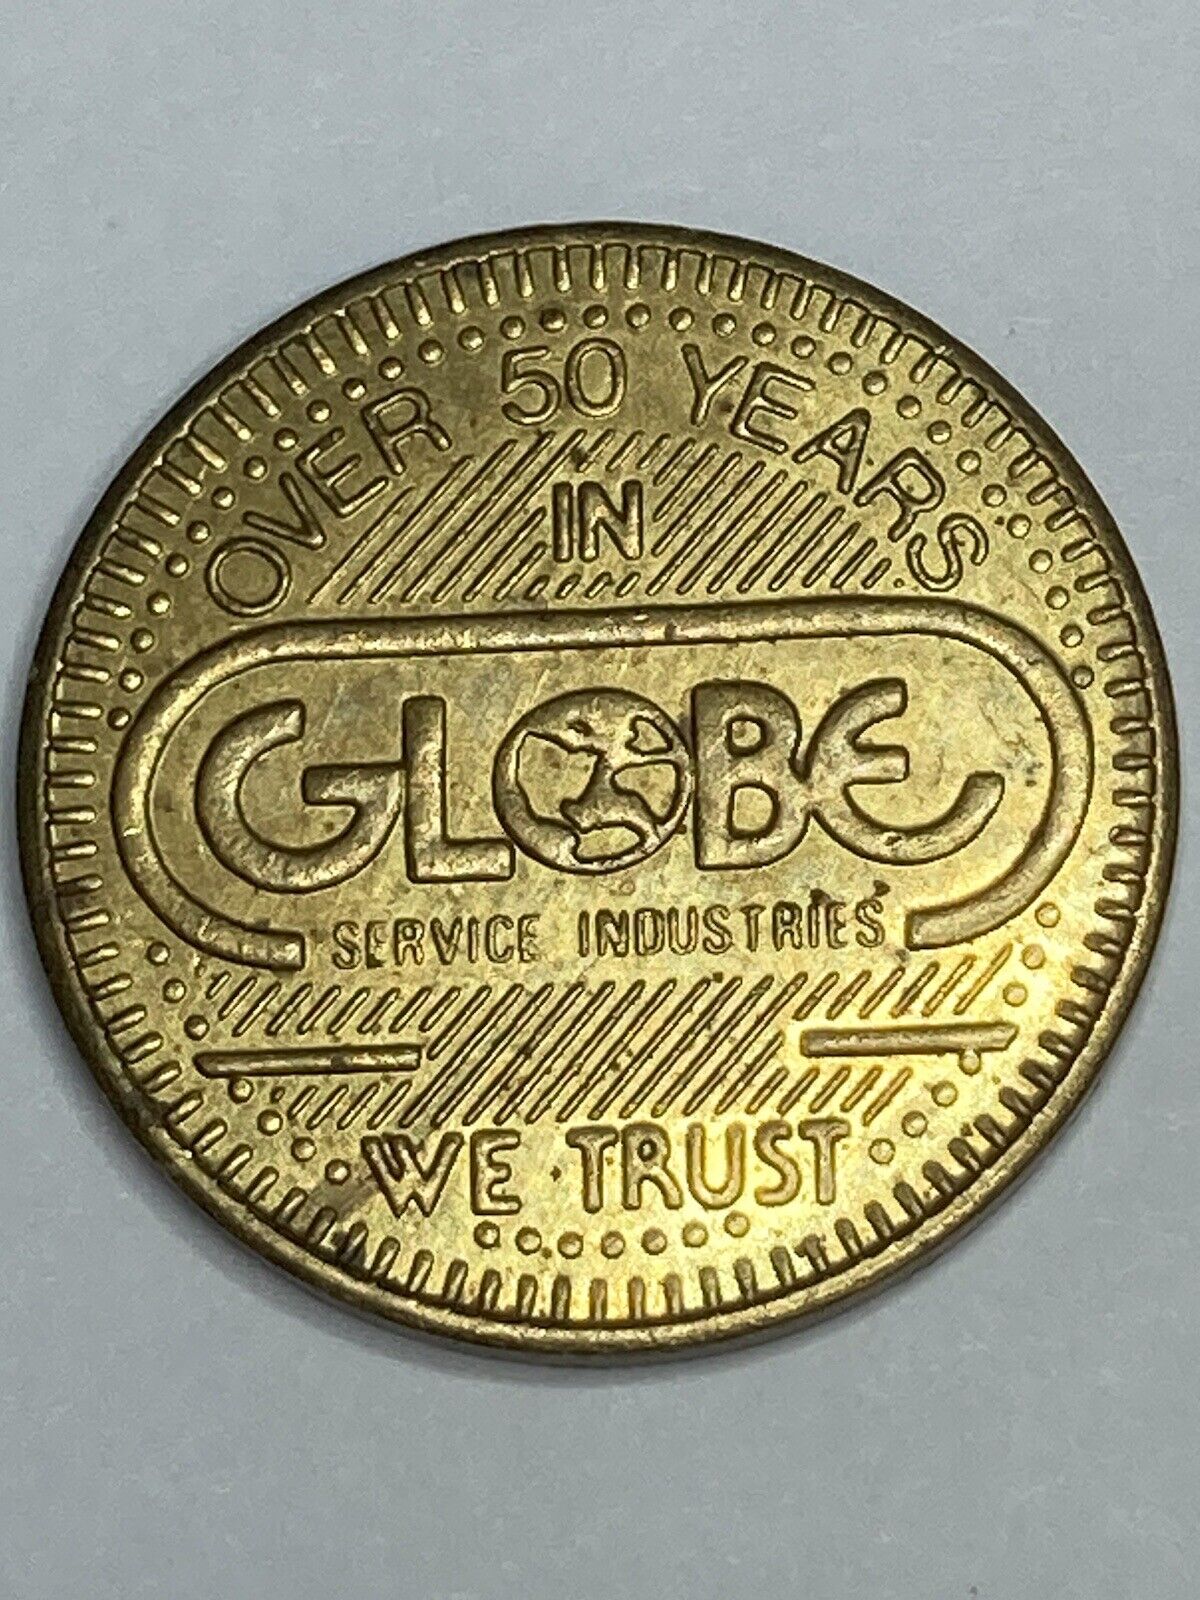 OLD GLOBE SERVICE INDUSTRIES TOKEN GOOD CLEANING CENTS #re1